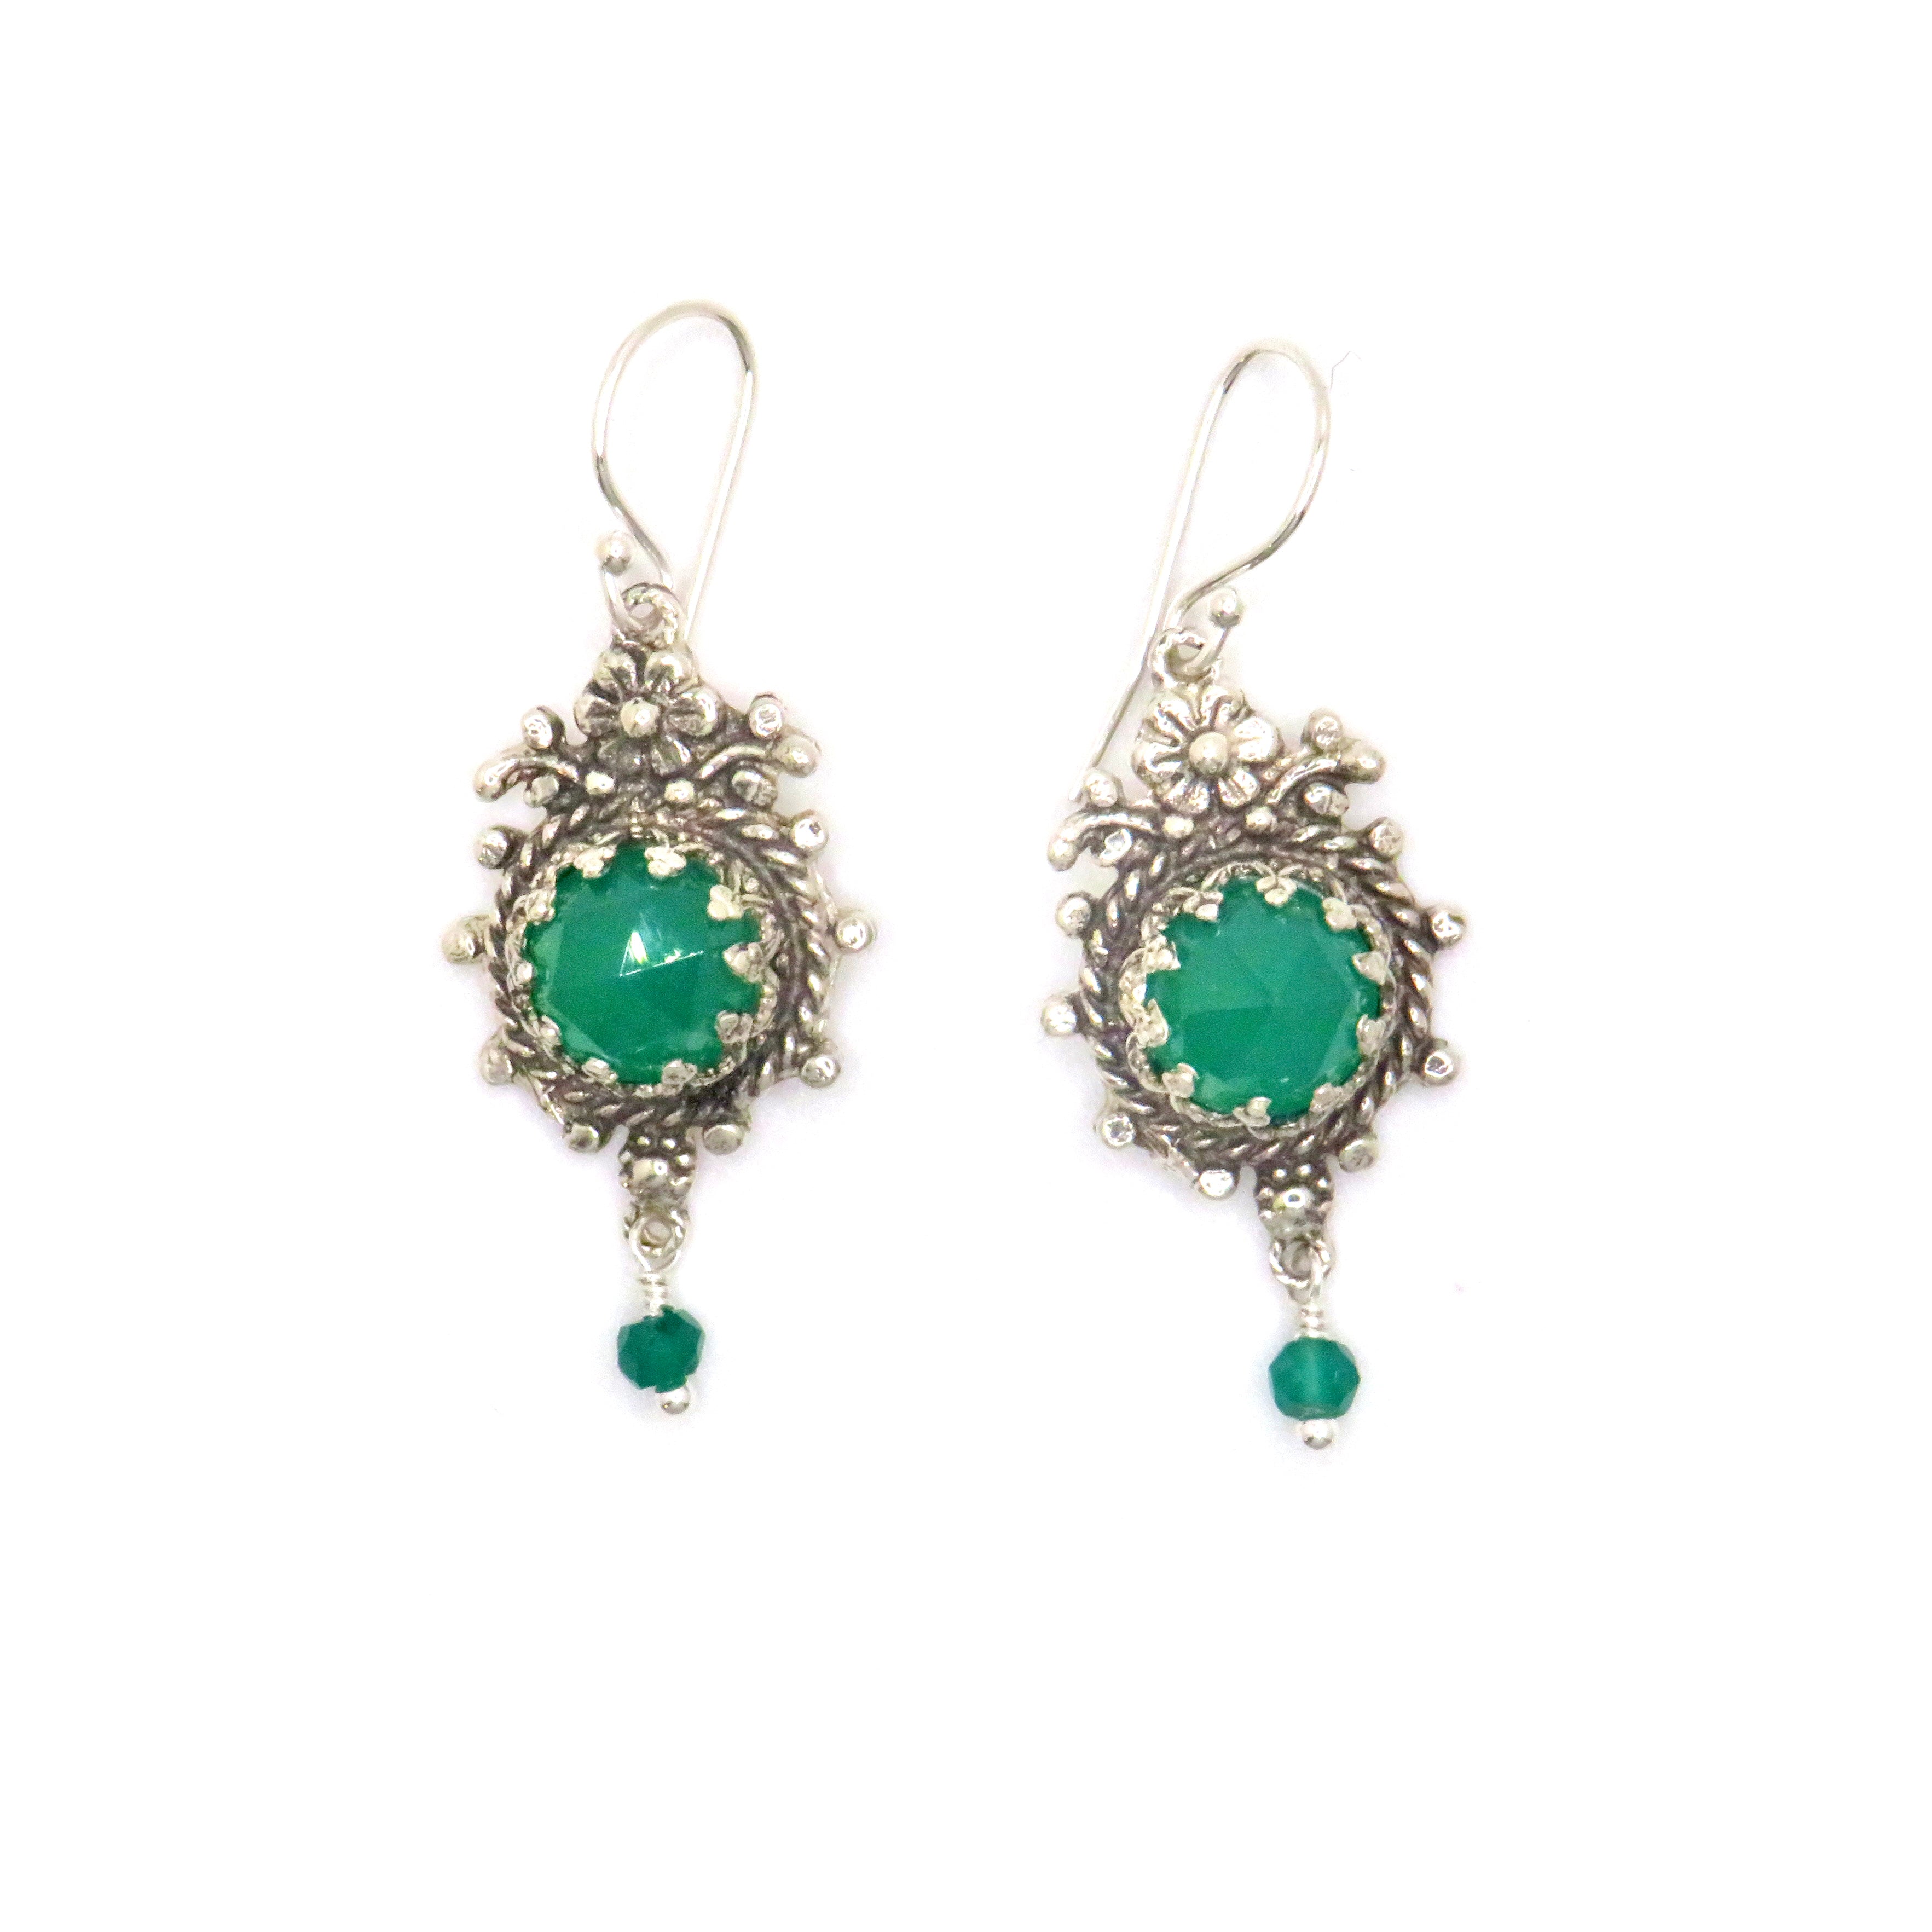 Green Onyx and Sterling Silver Filigree Daisy Earrings